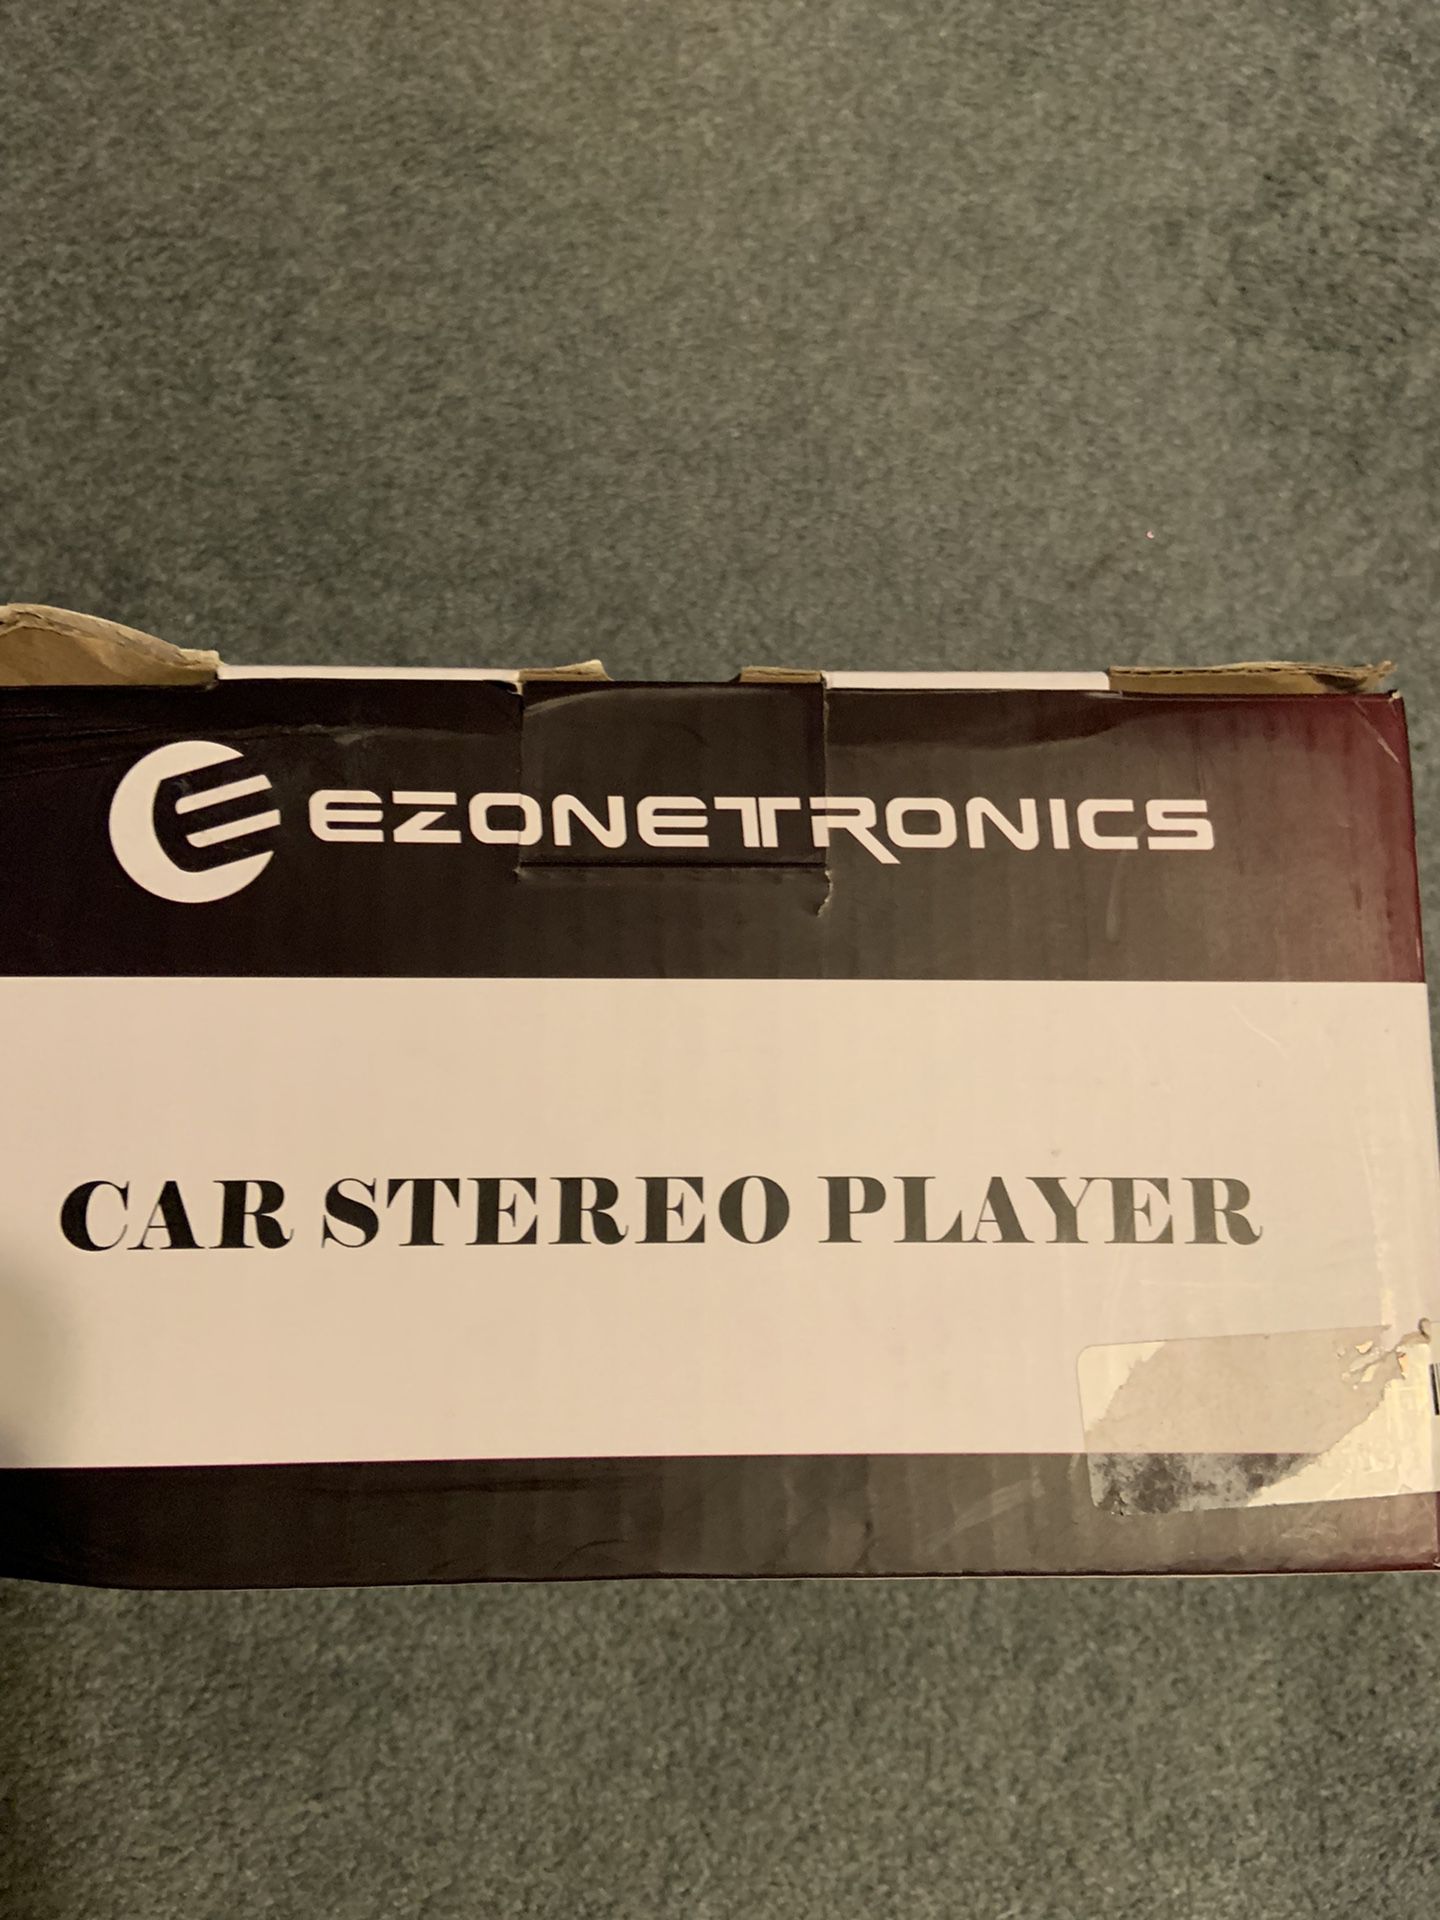 Ezonetronics Car Stereo Player  Android  Best reasonable Offers Considered 